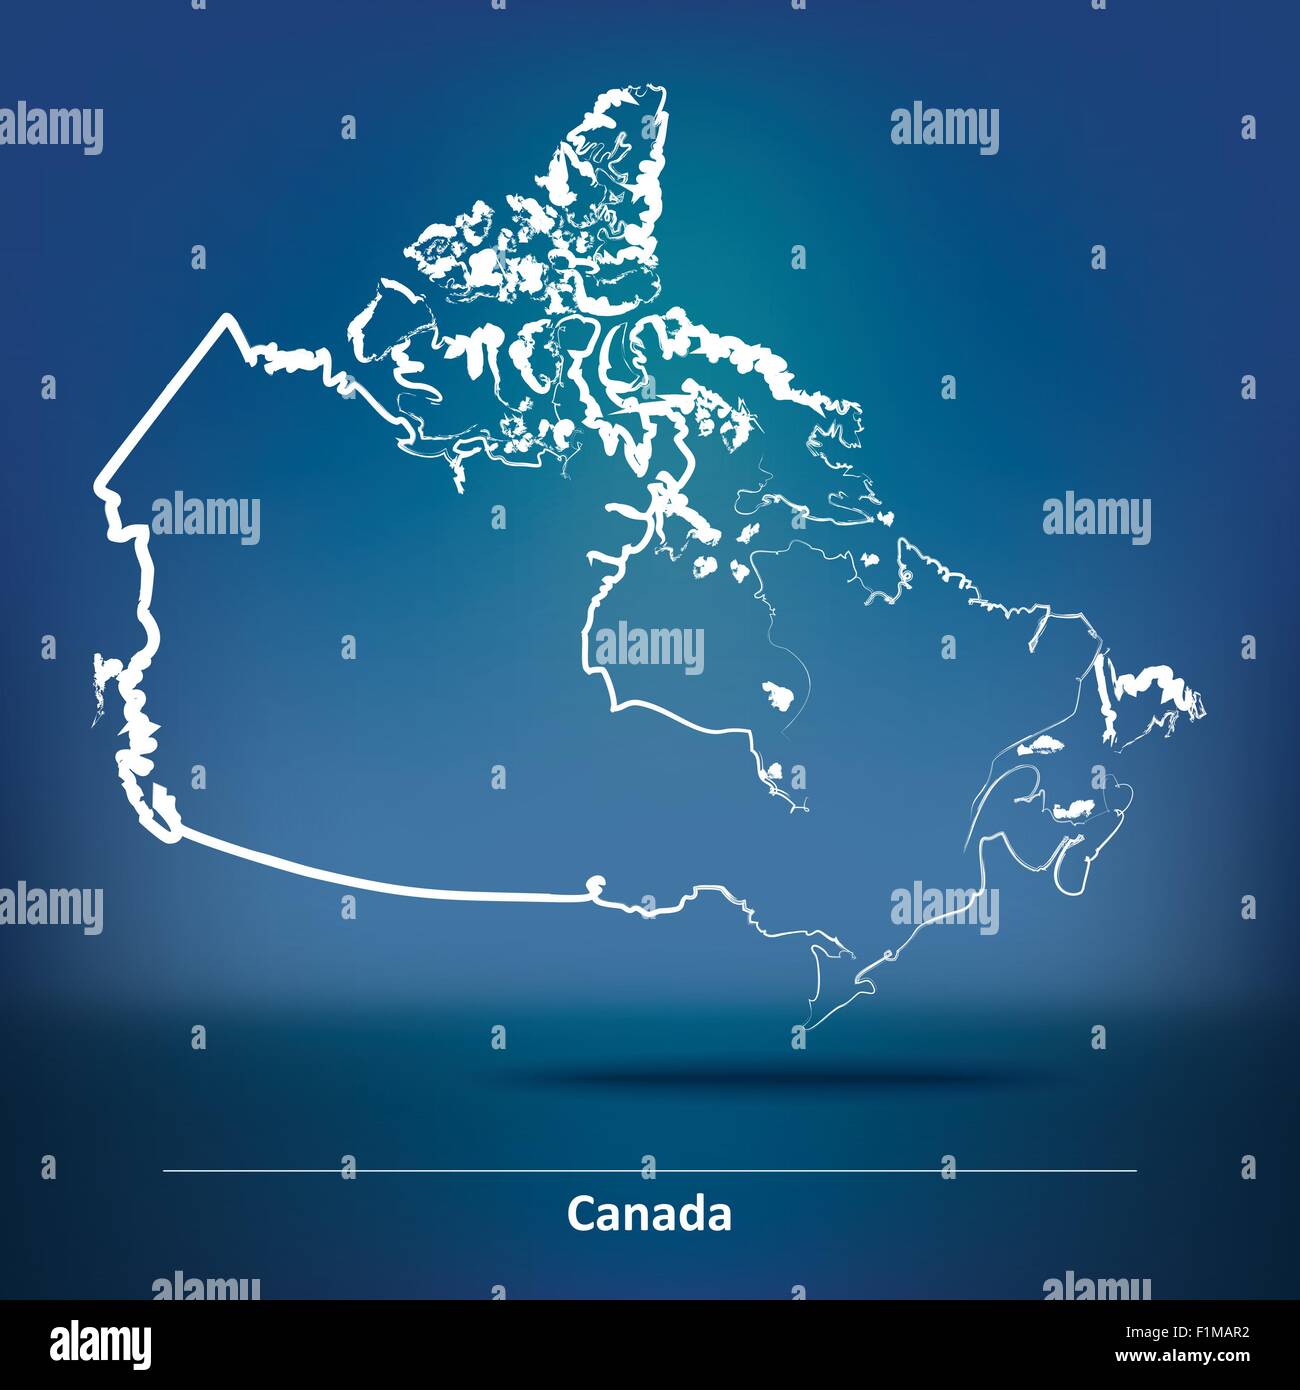 Doodle Map of Canada - vector illustration Stock Vector